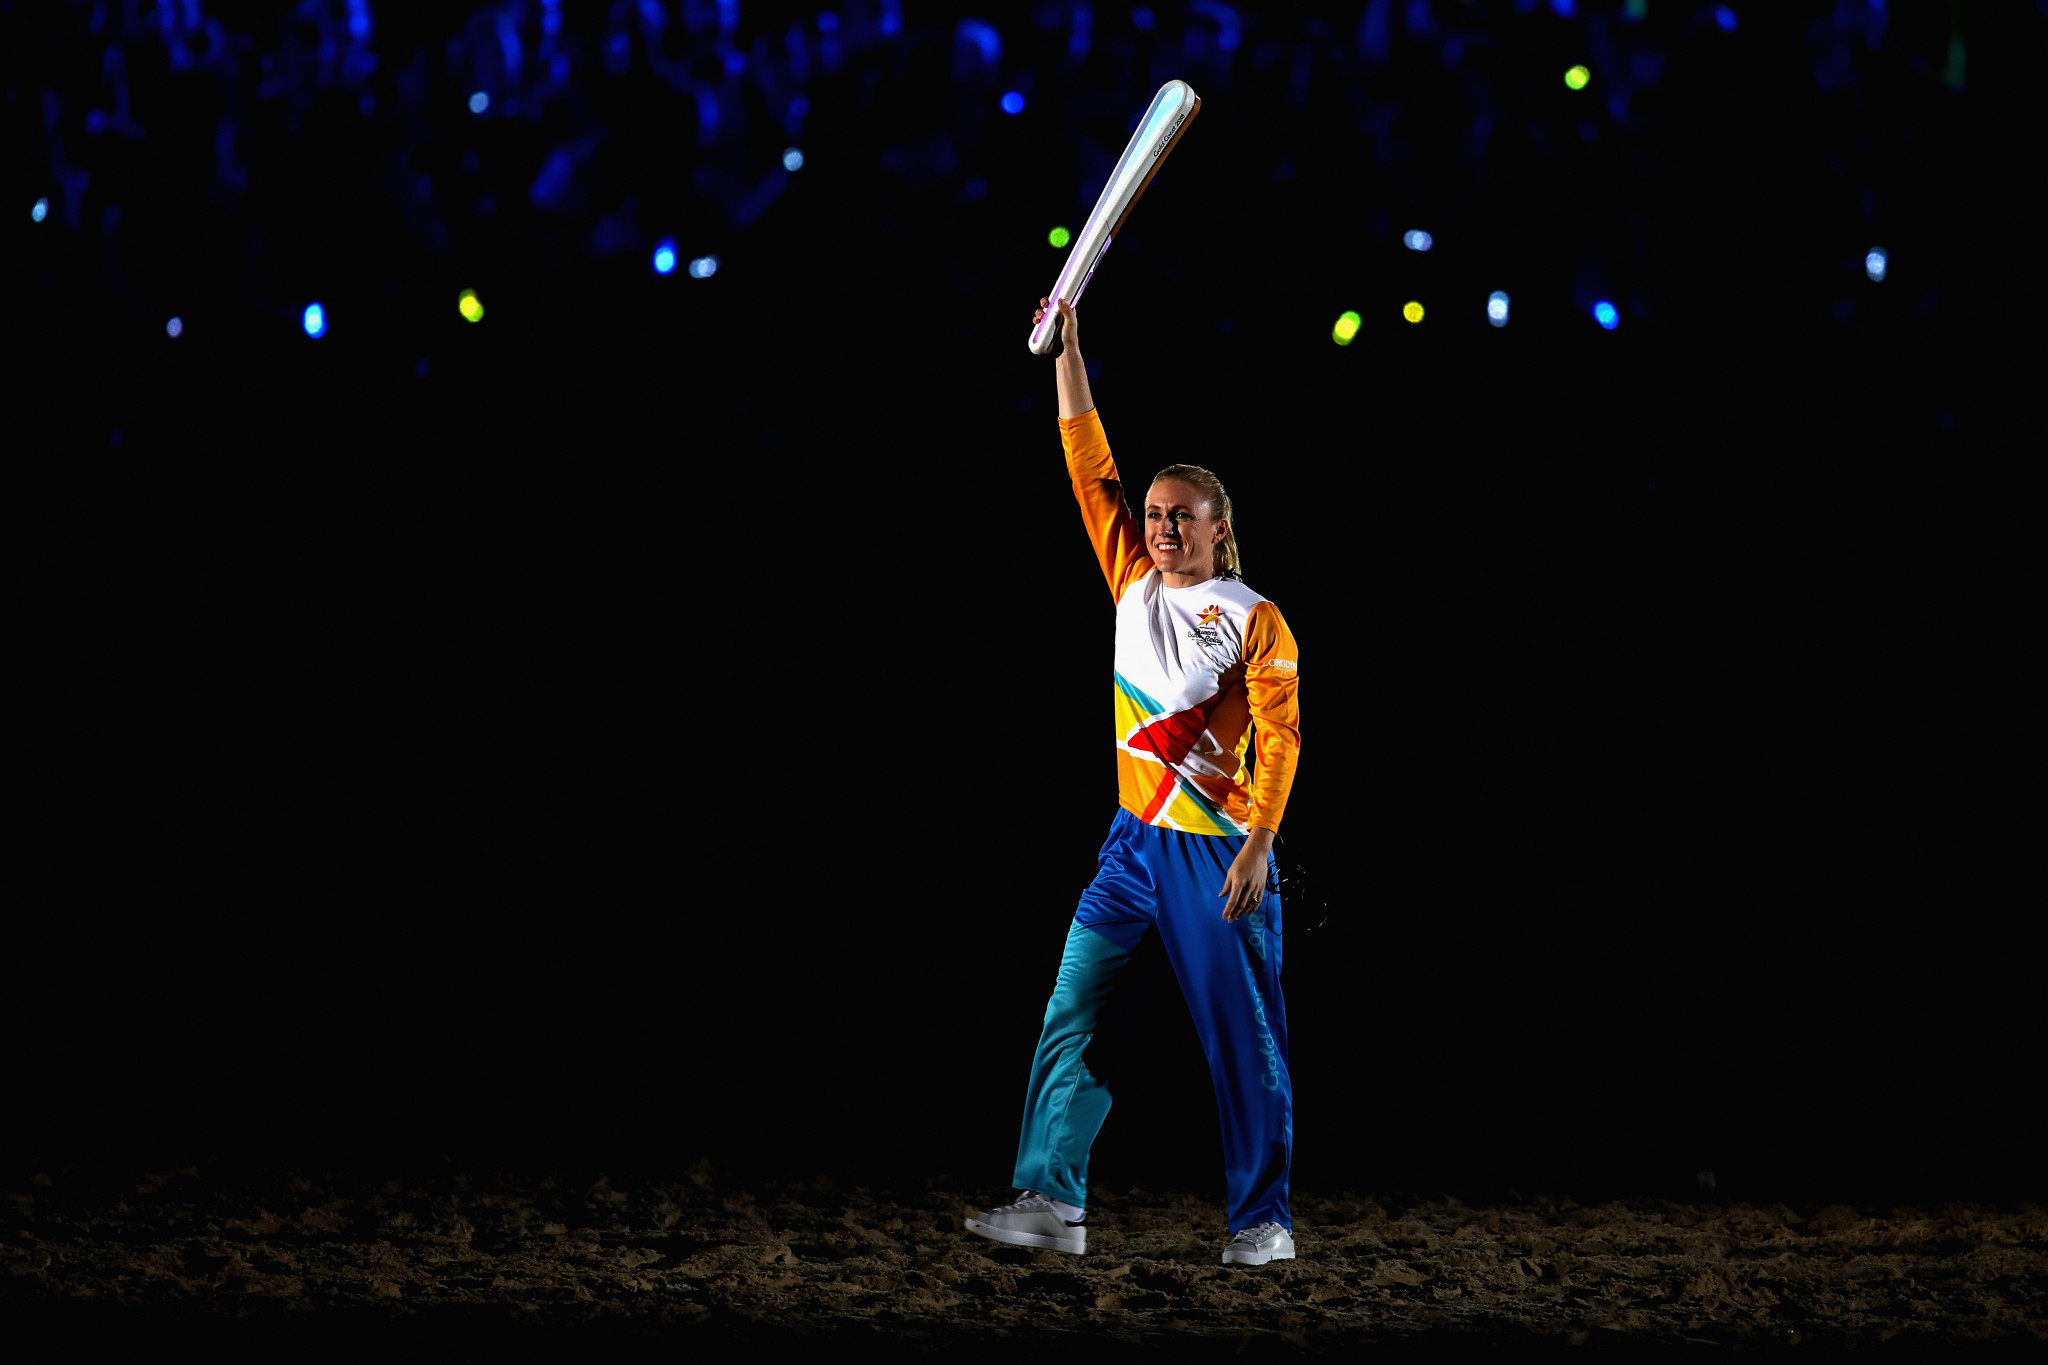 Sally Pearson carries the baton at the Opening Ceremony of Gold Coast 2018 ©Getty Images